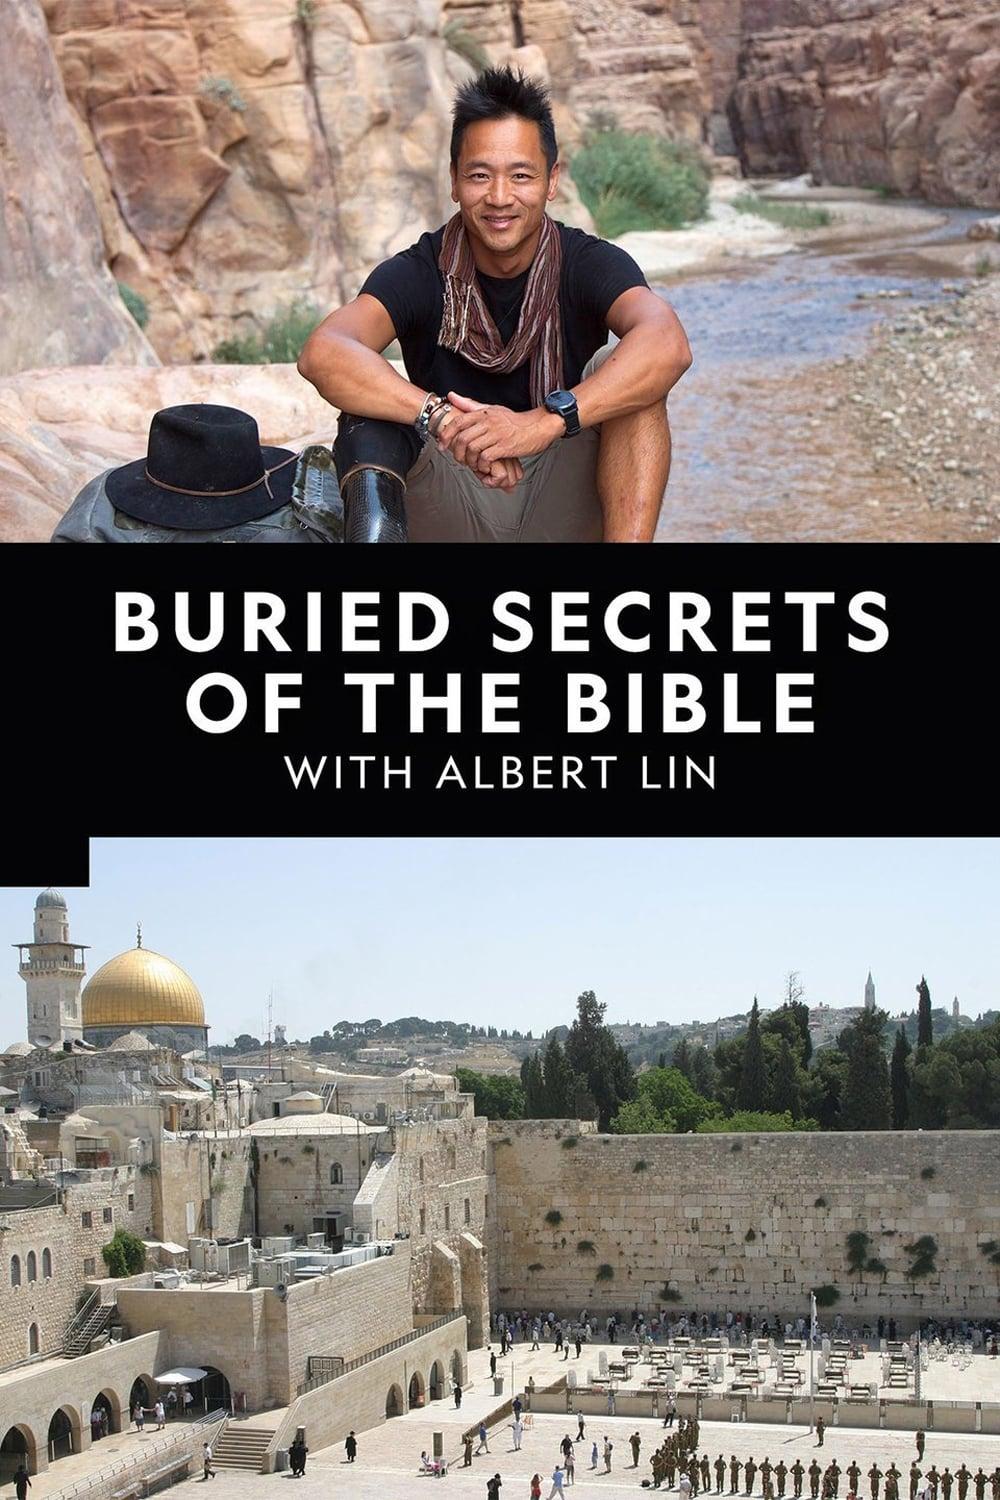 Buried Secrets of The Bible With Albert Lin poster